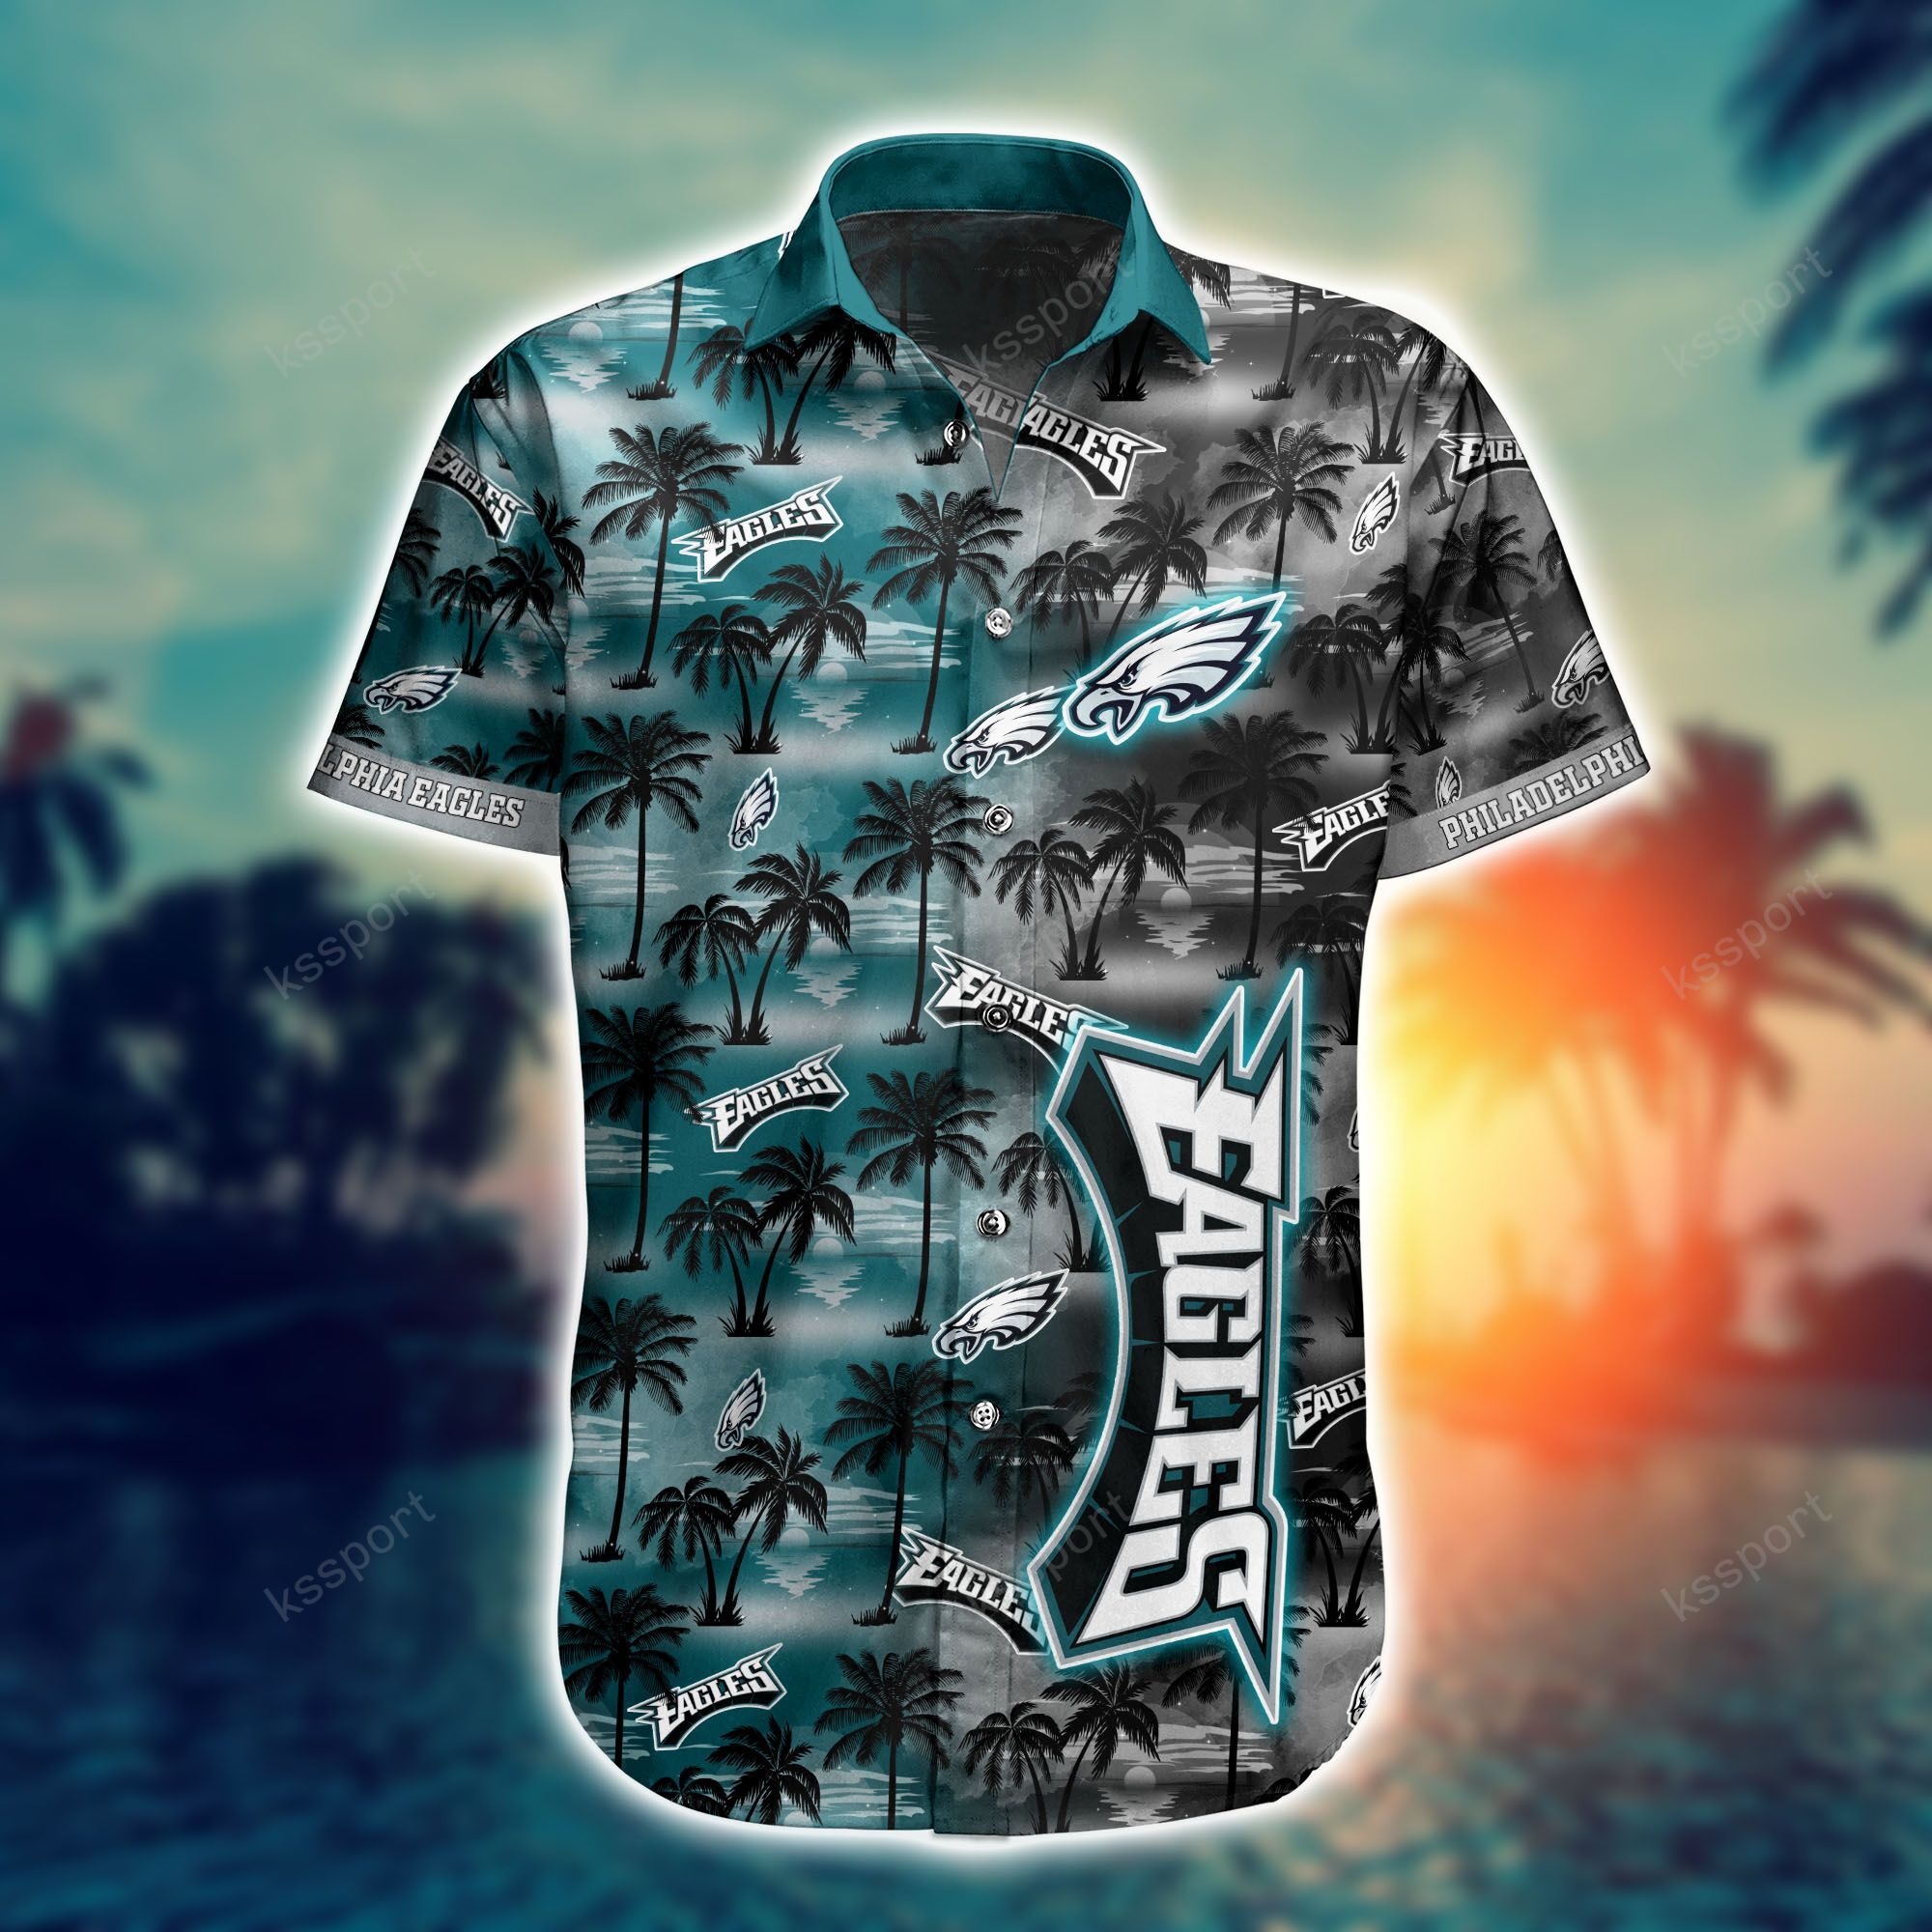 Top cool Hawaiian shirt 2022 - Make sure you get yours today before they run out! 205